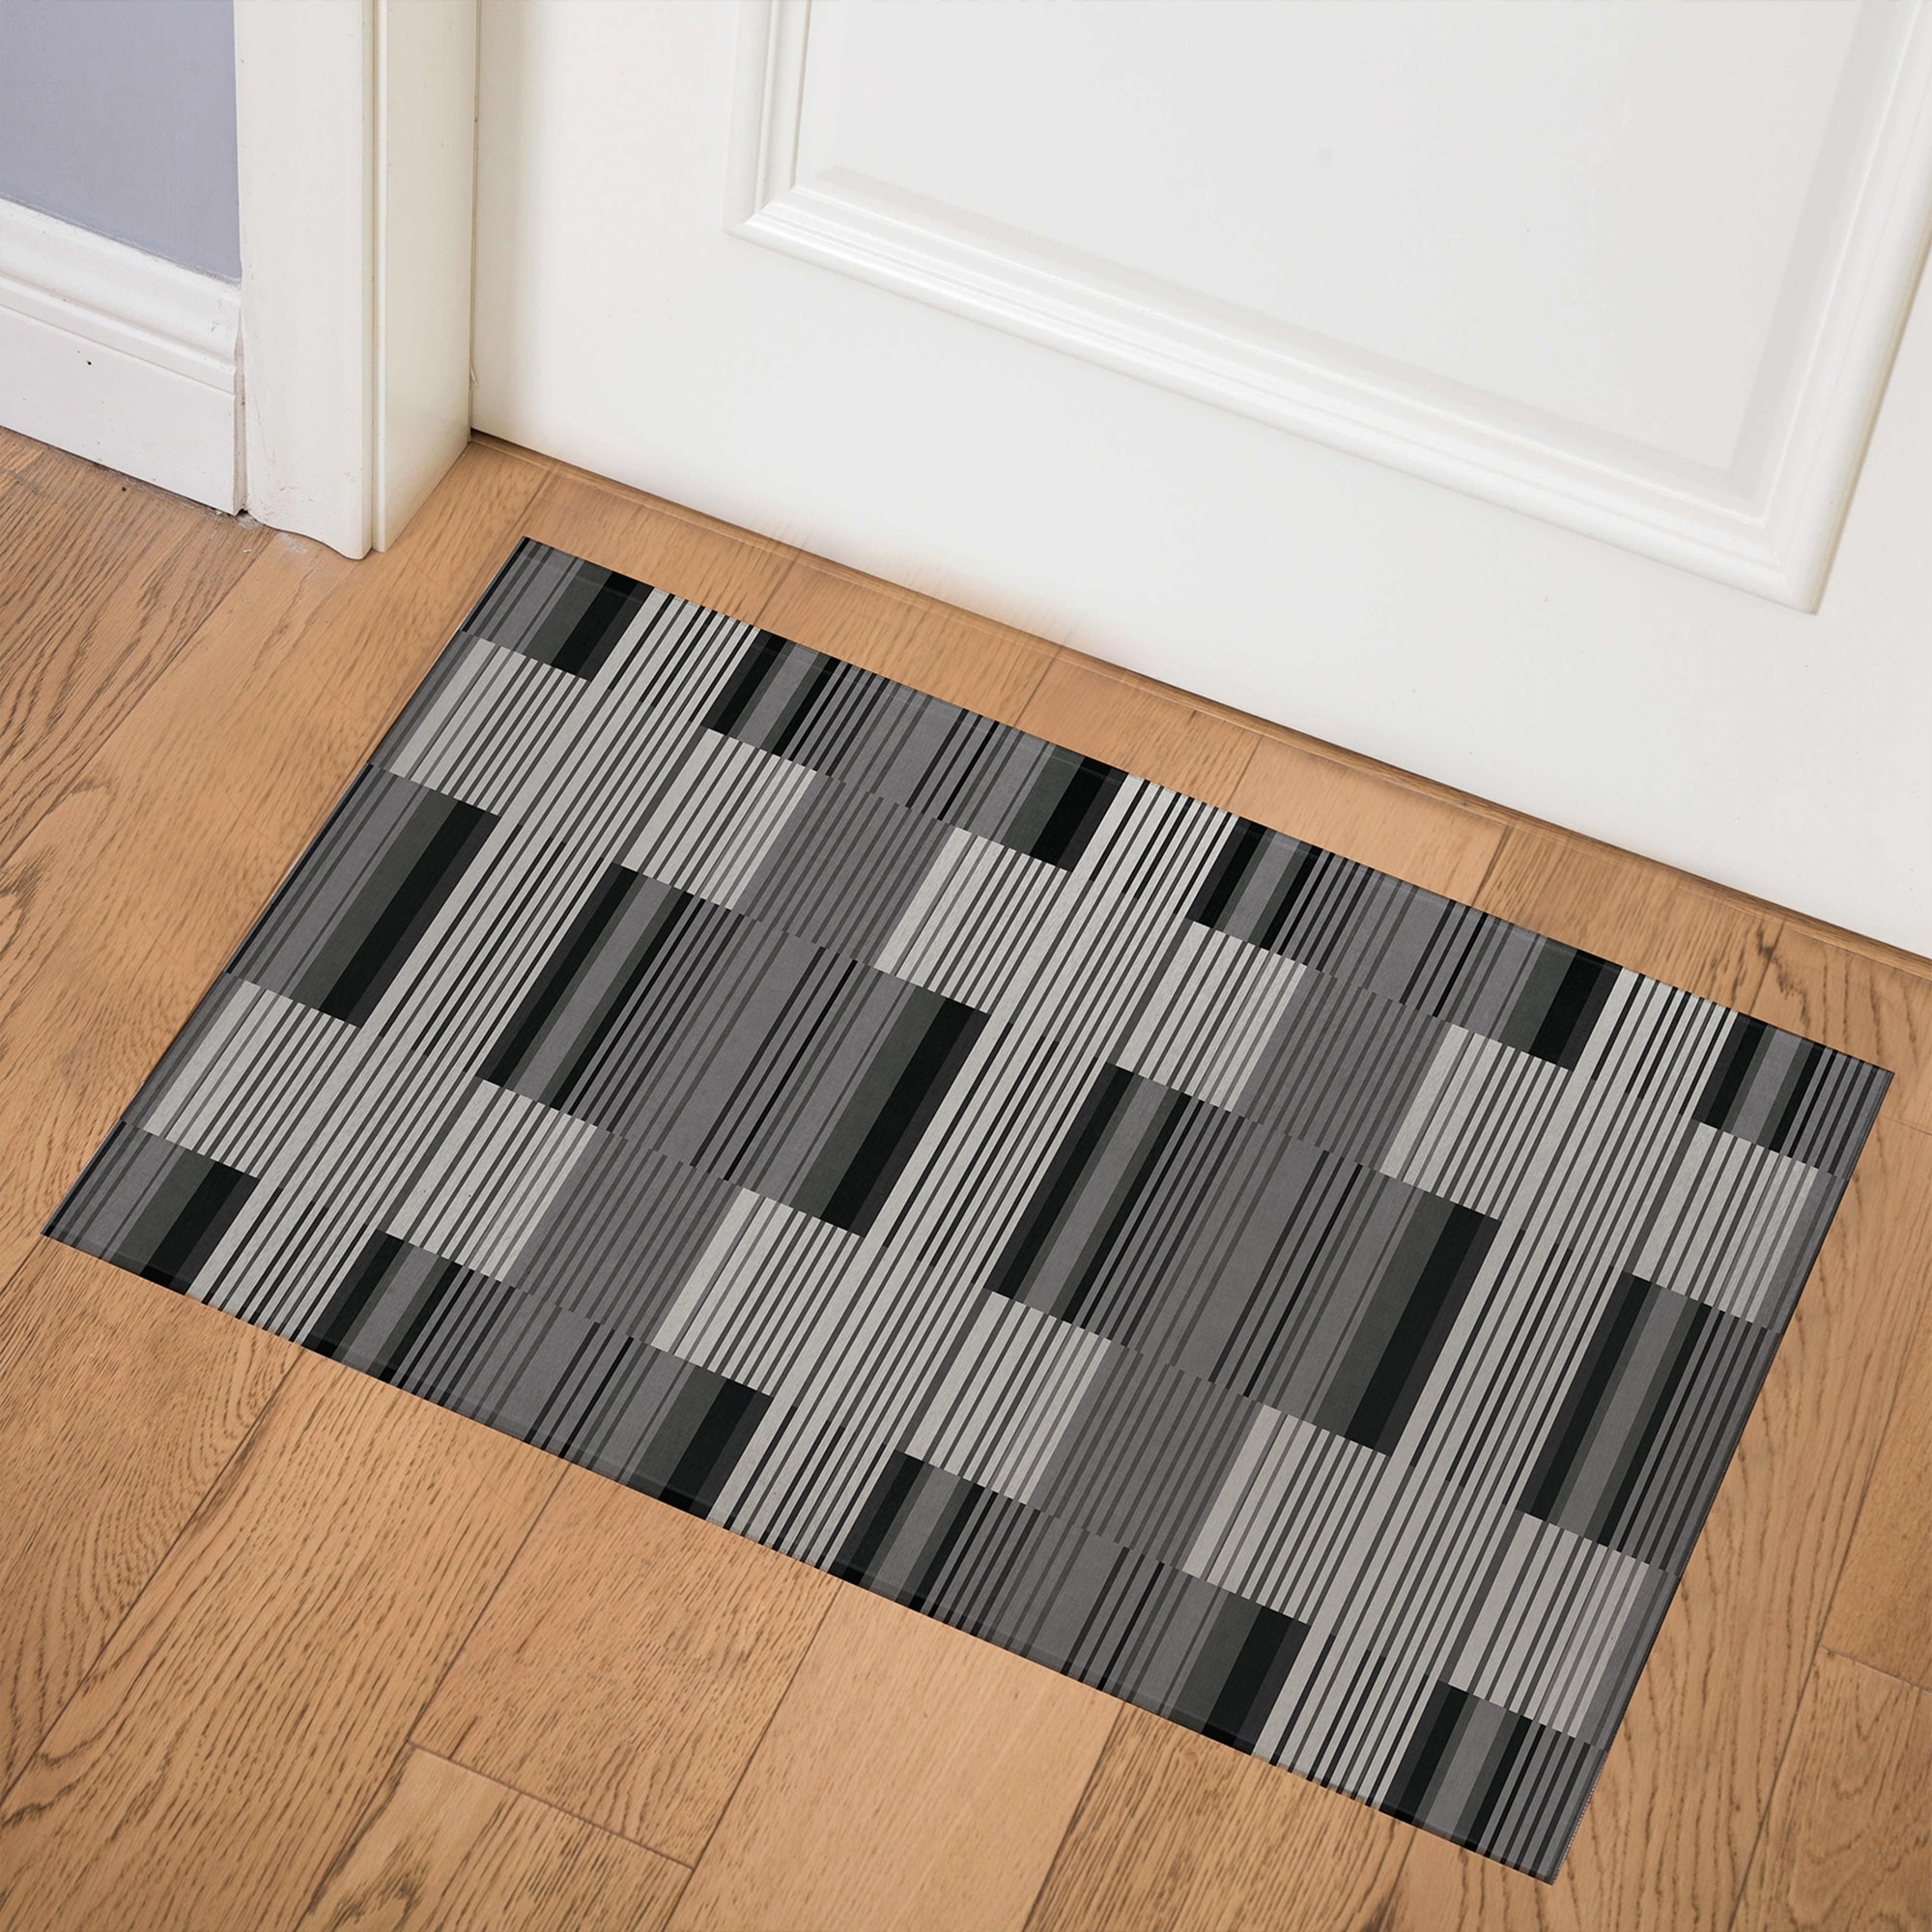 https://ak1.ostkcdn.com/images/products/is/images/direct/f0bba66224c3ca38ab55099d6847628dc263740a/BAUHAUS-STRIPE-GREY-Indoor-Floor-Mat-By-Kavka-Designs.jpg